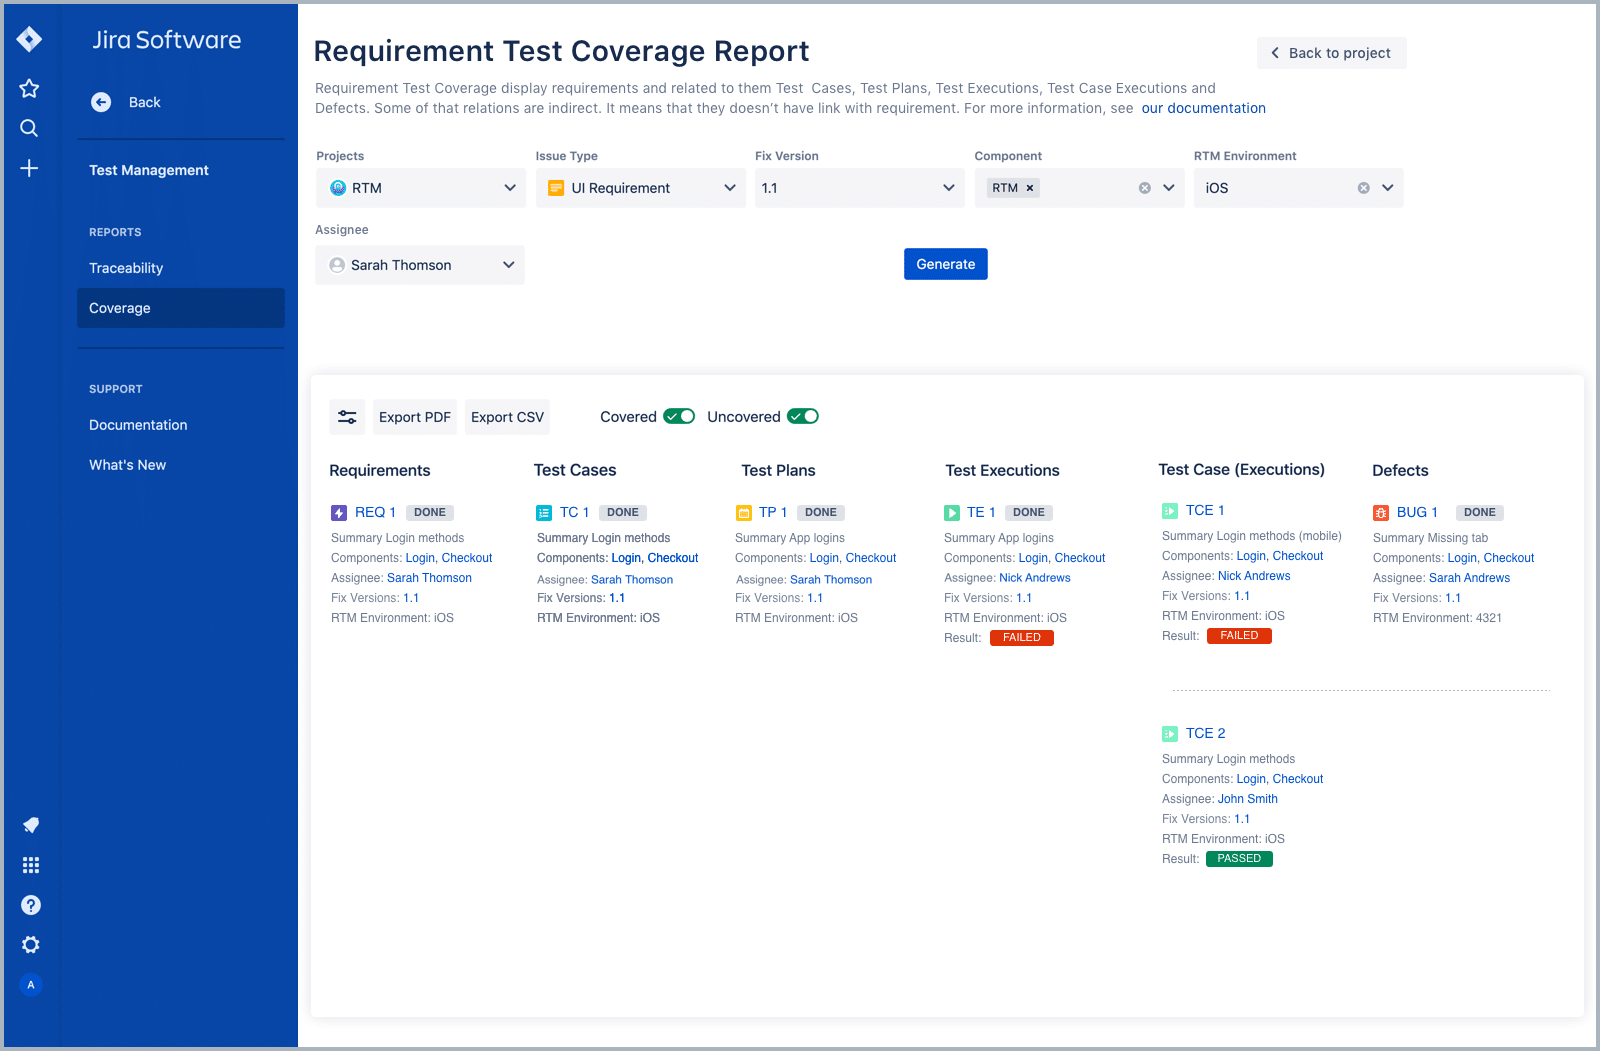 Requirement Test Coverage Report in RTM Screen View - Requirements, Test Cases, Test Plans, Test Executions, Test Case (Executions), Deffects, TCE 2